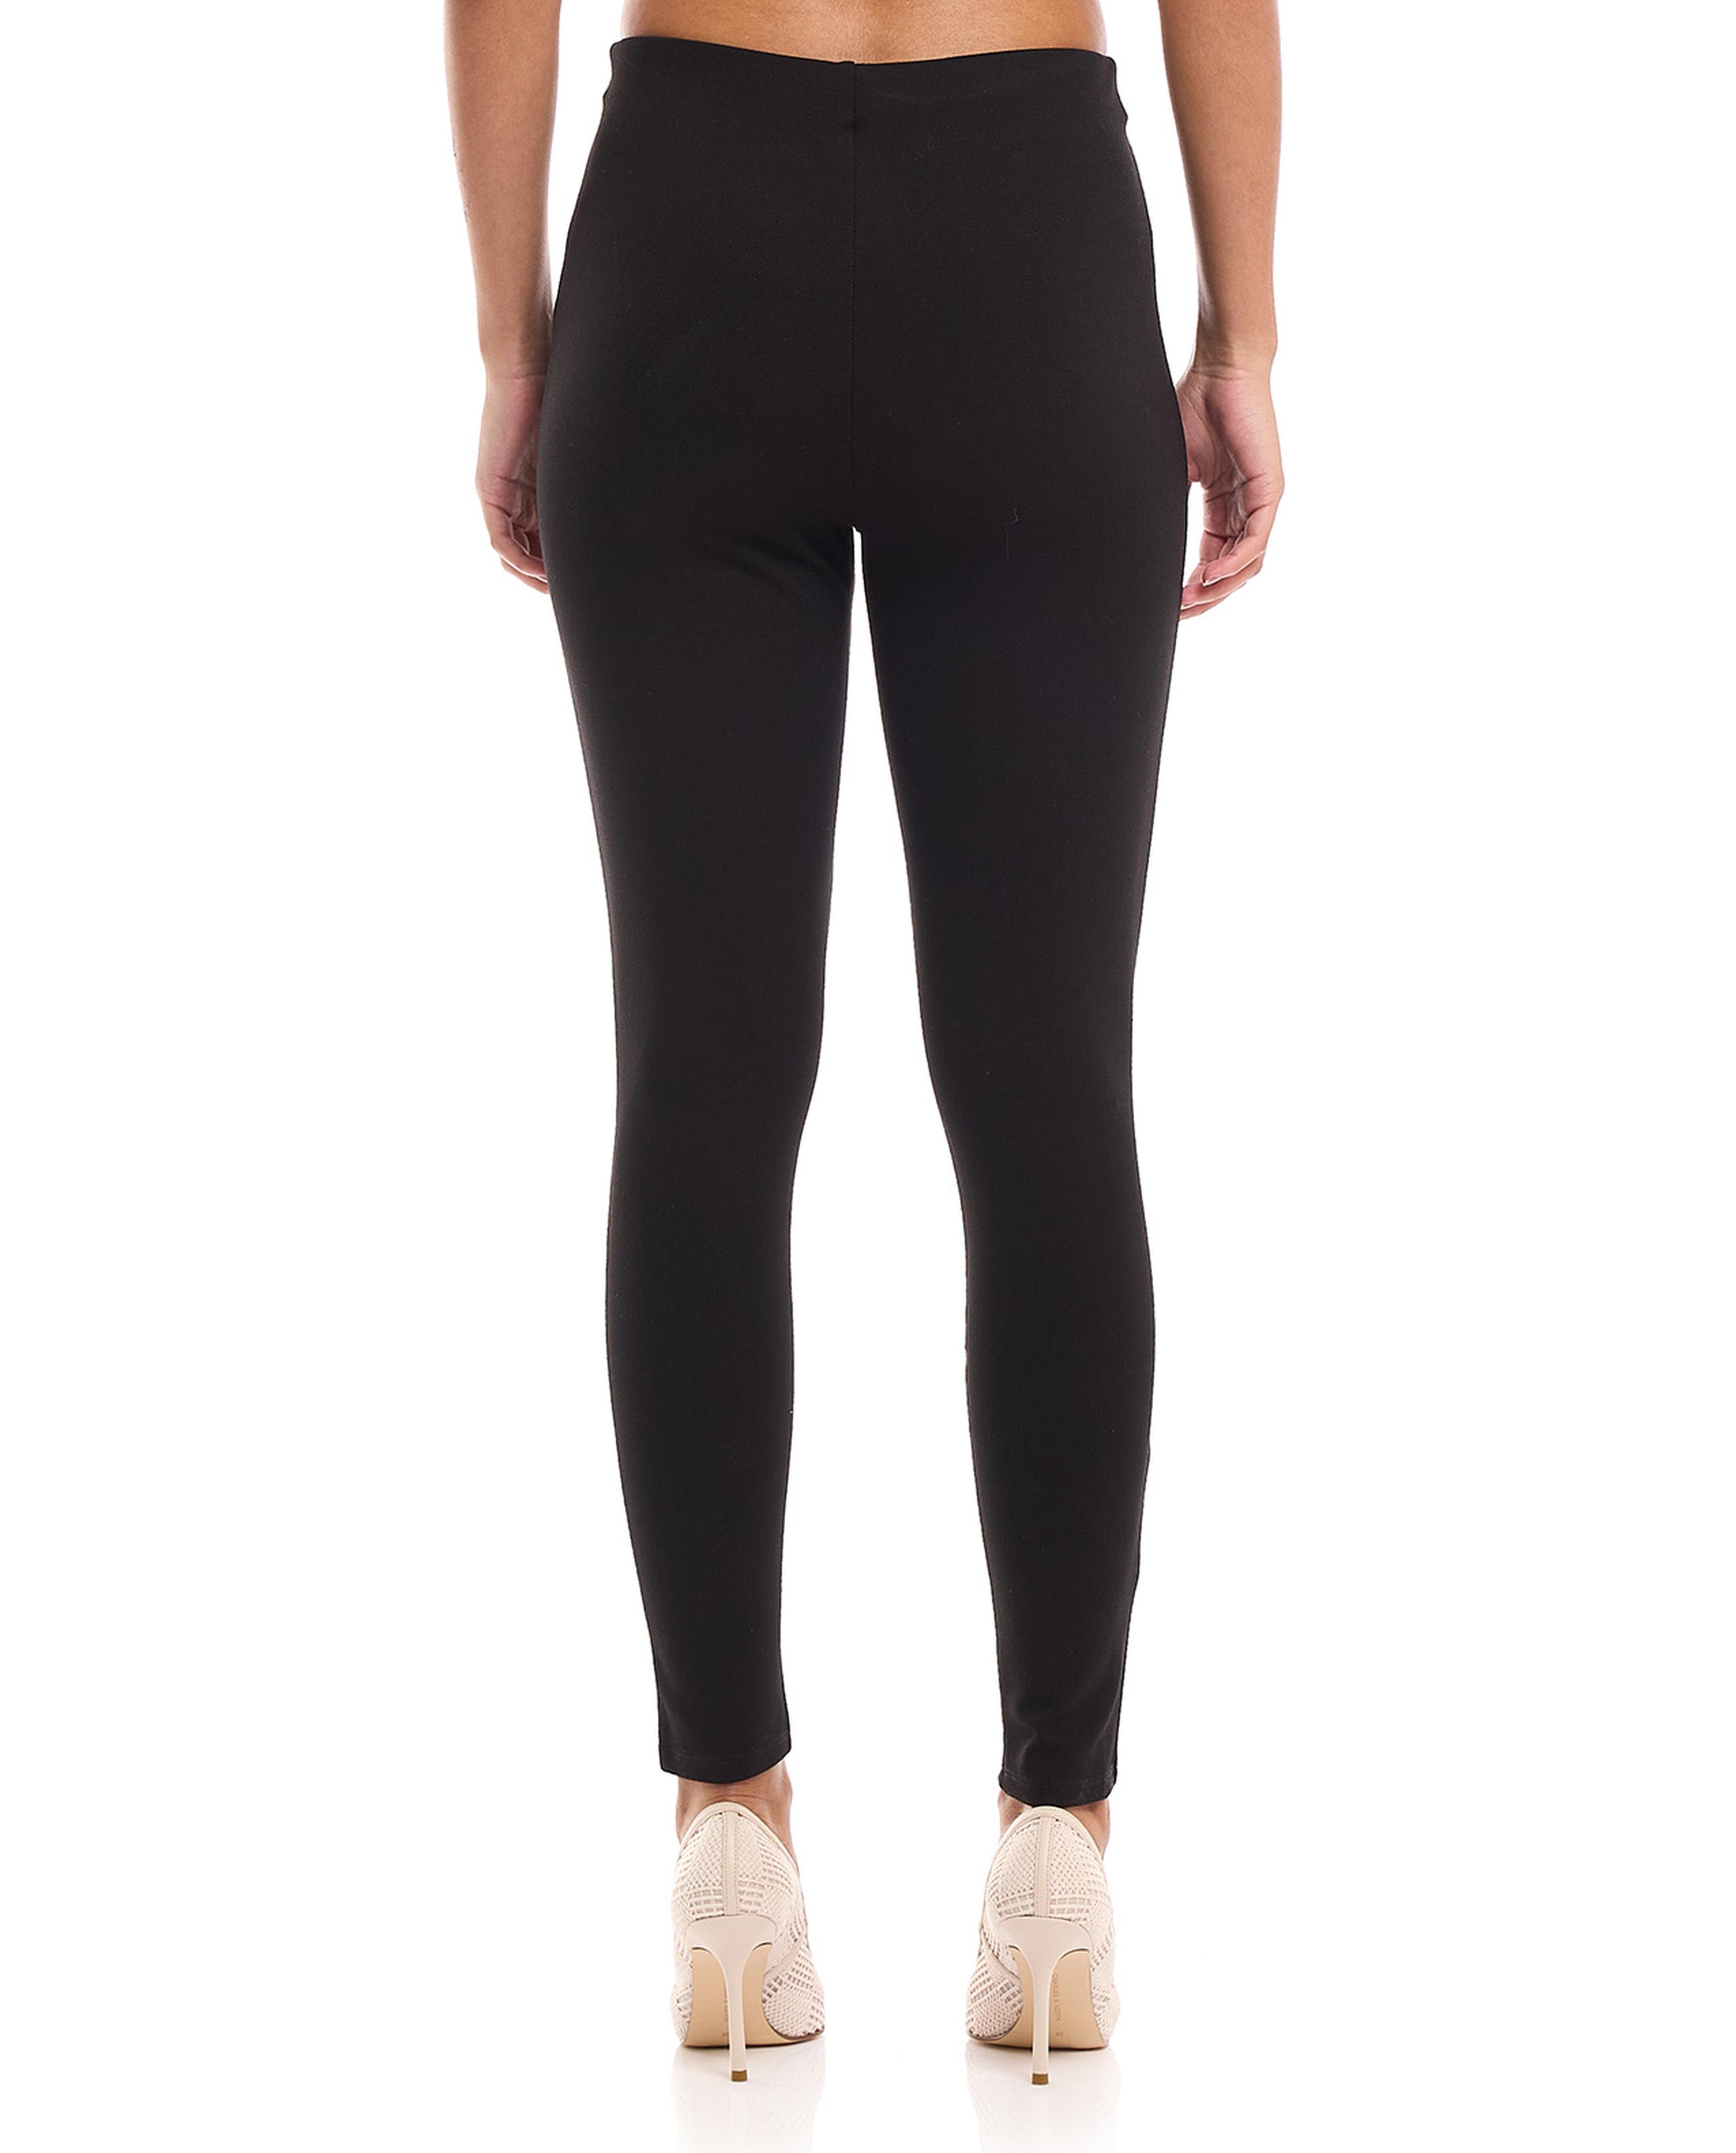 Solid Skinny Fit Pants with Elastic Waist